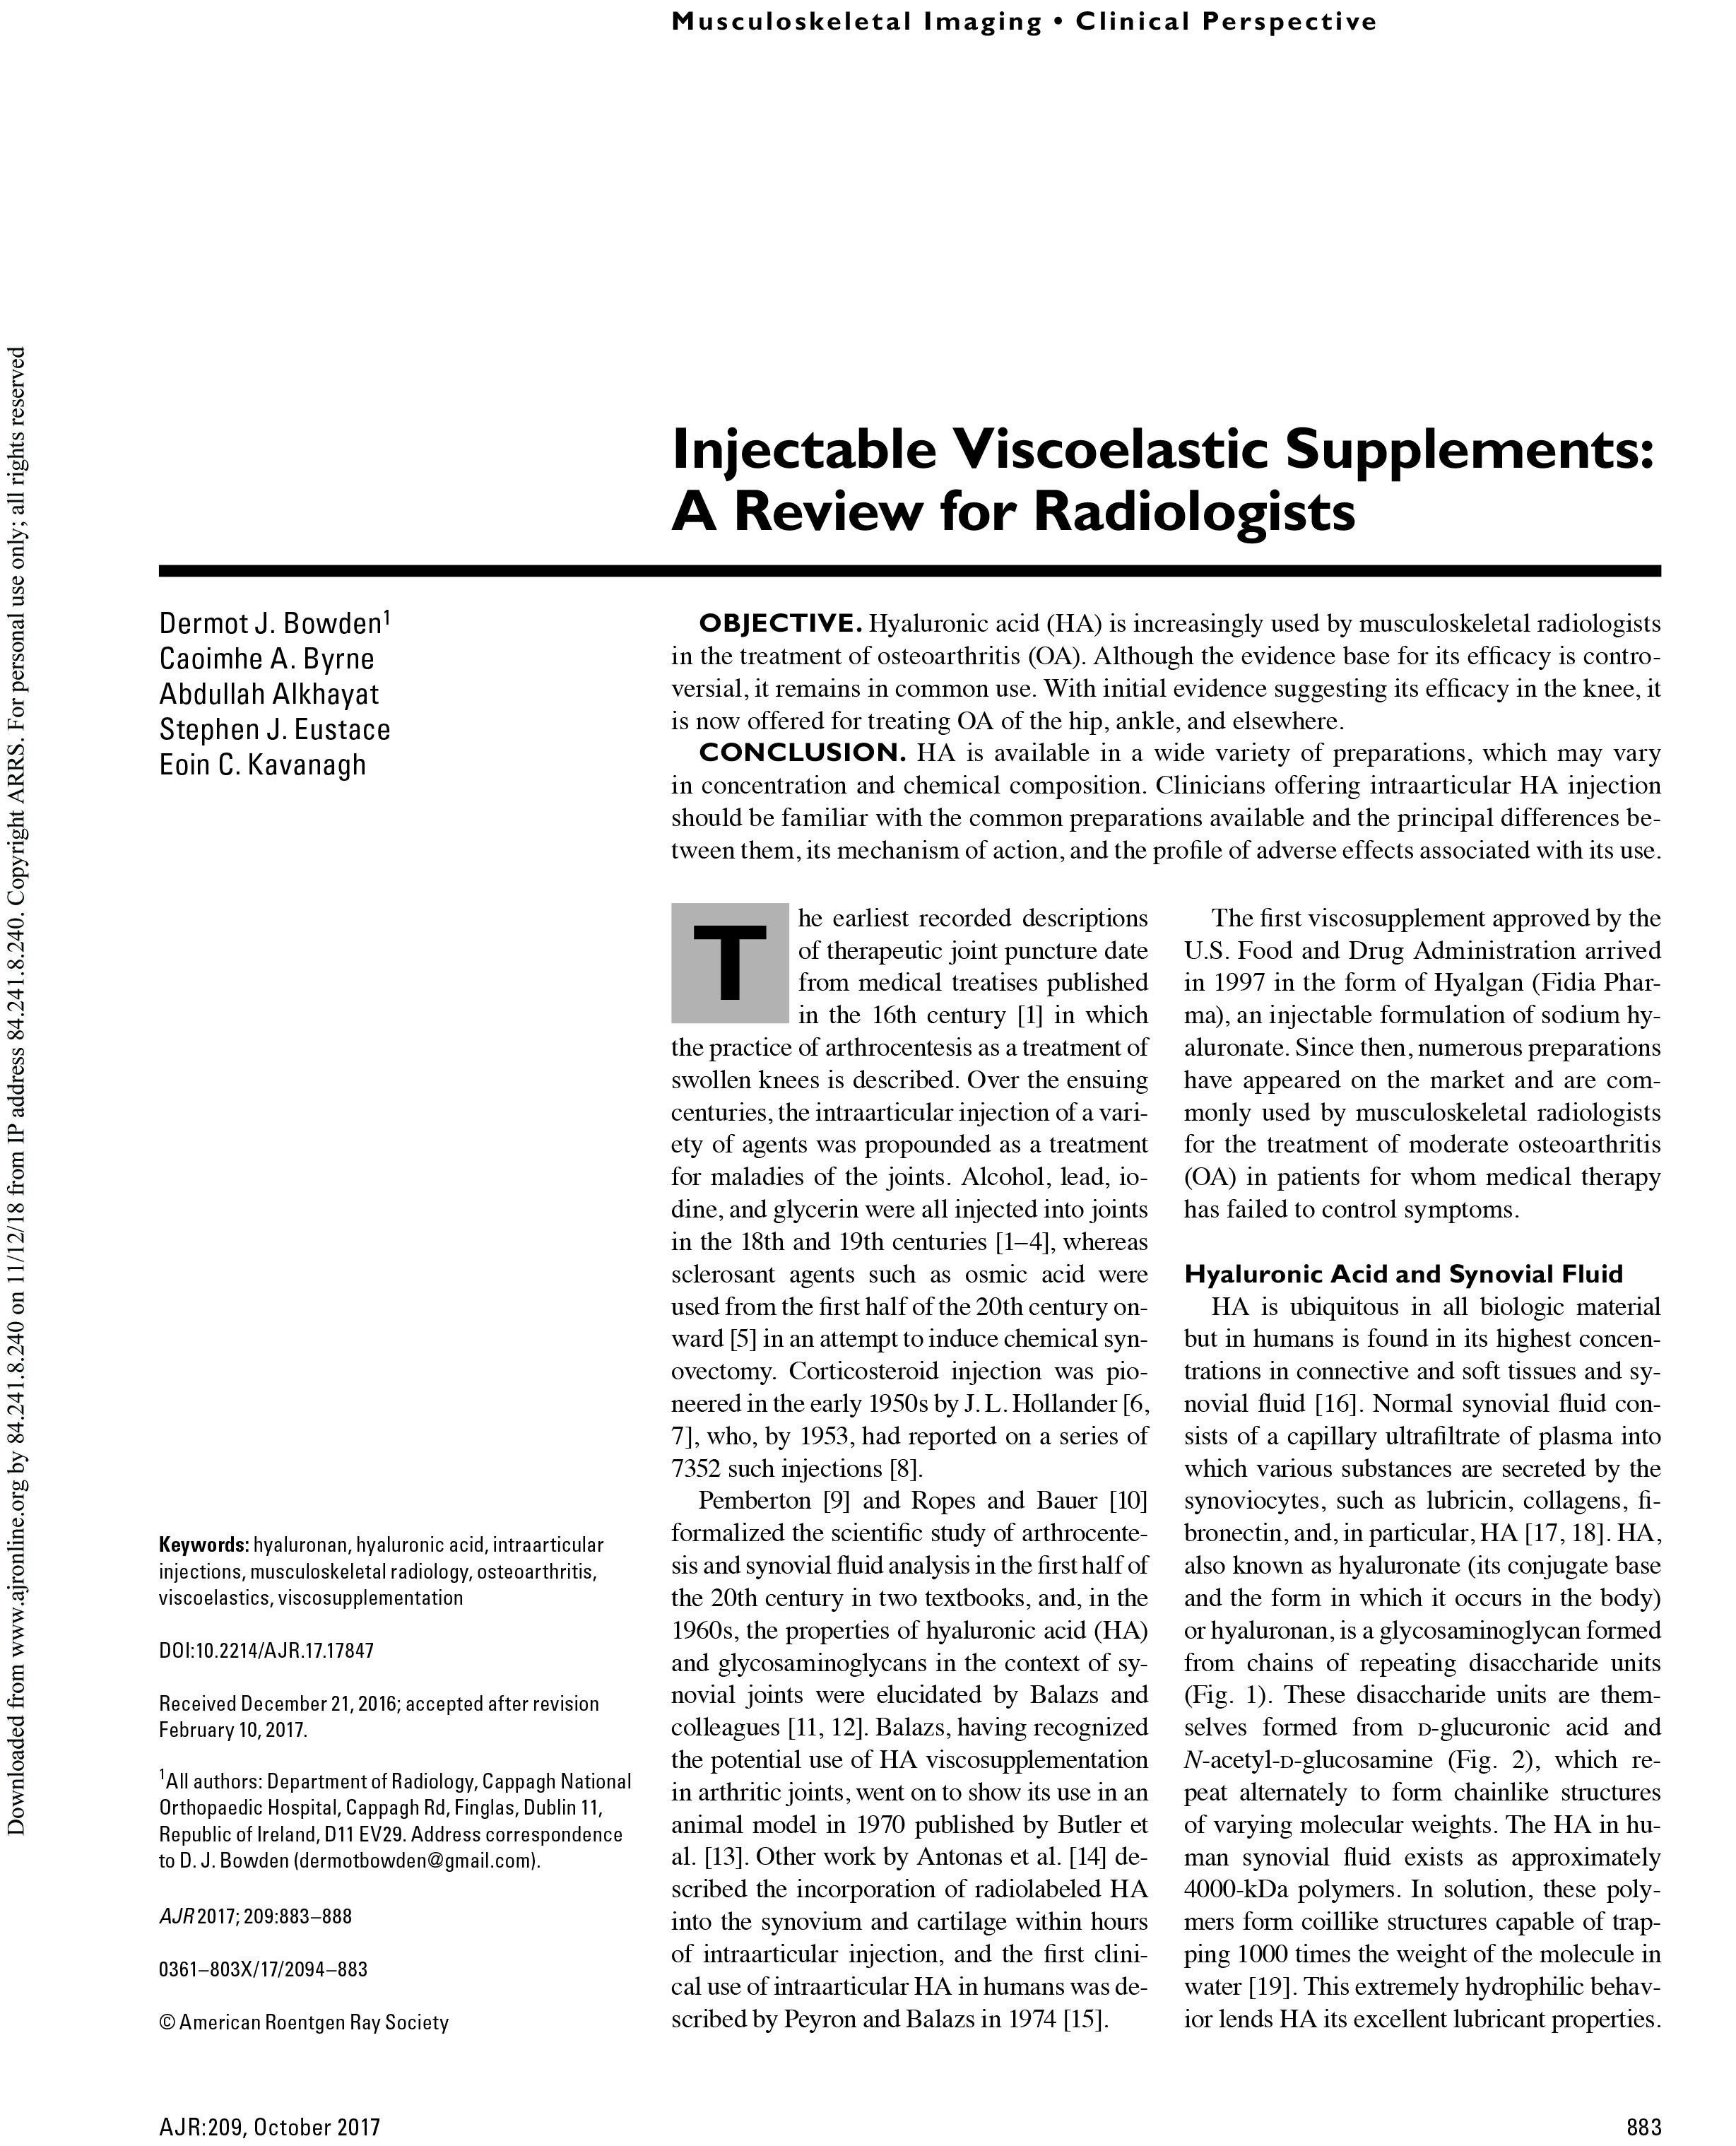 Injectable-a-review-for-radiologists-1.jpg